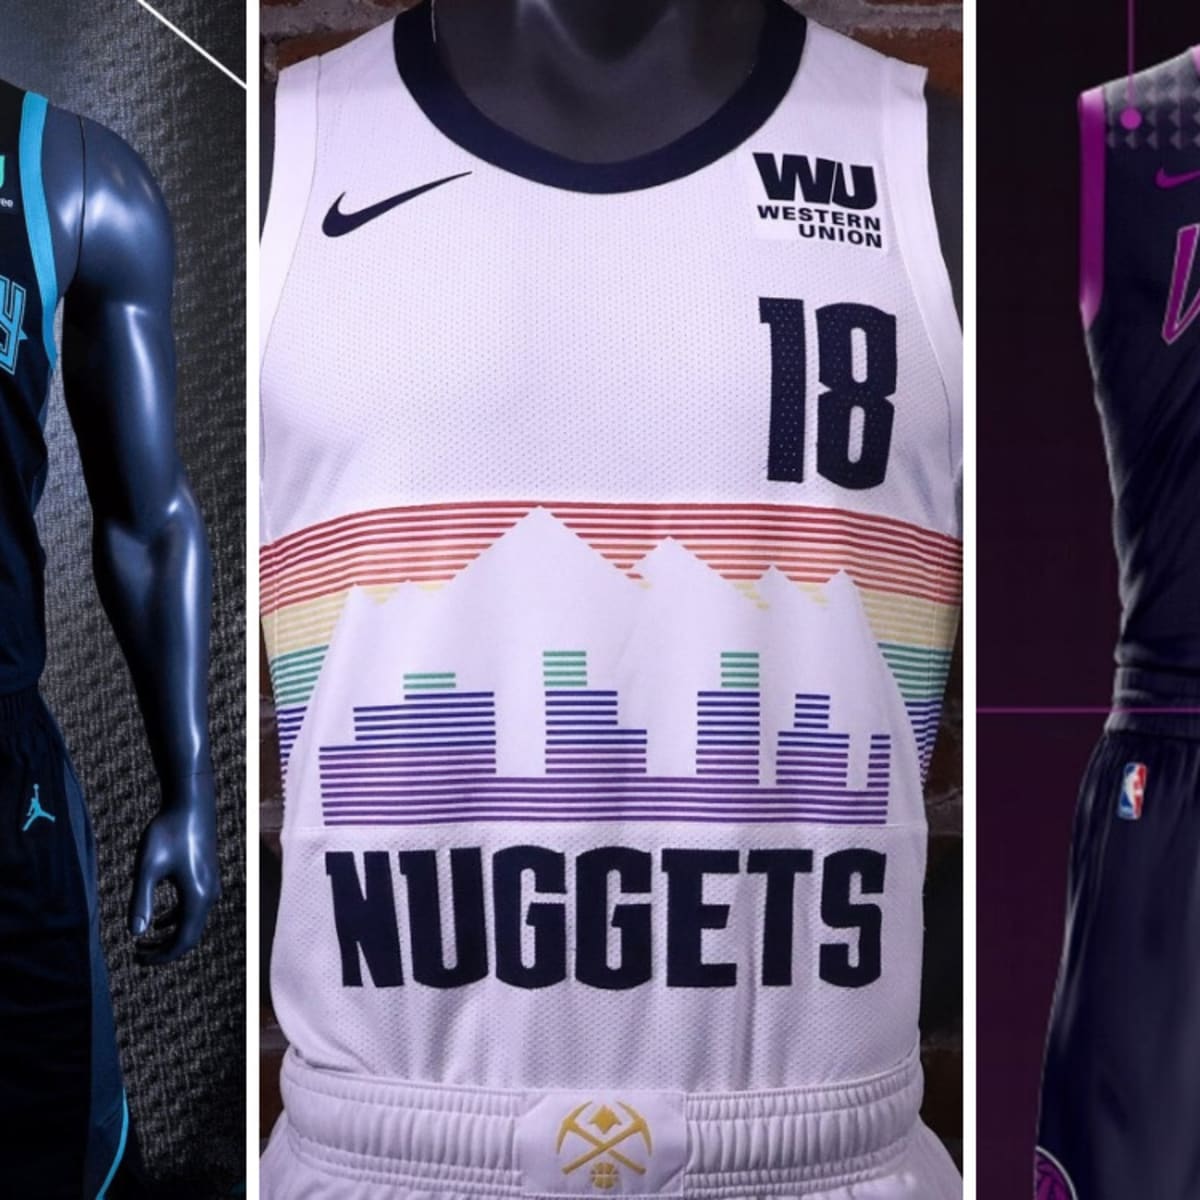 Here is the Wizards 'The District' City Edition uniform - Bullets